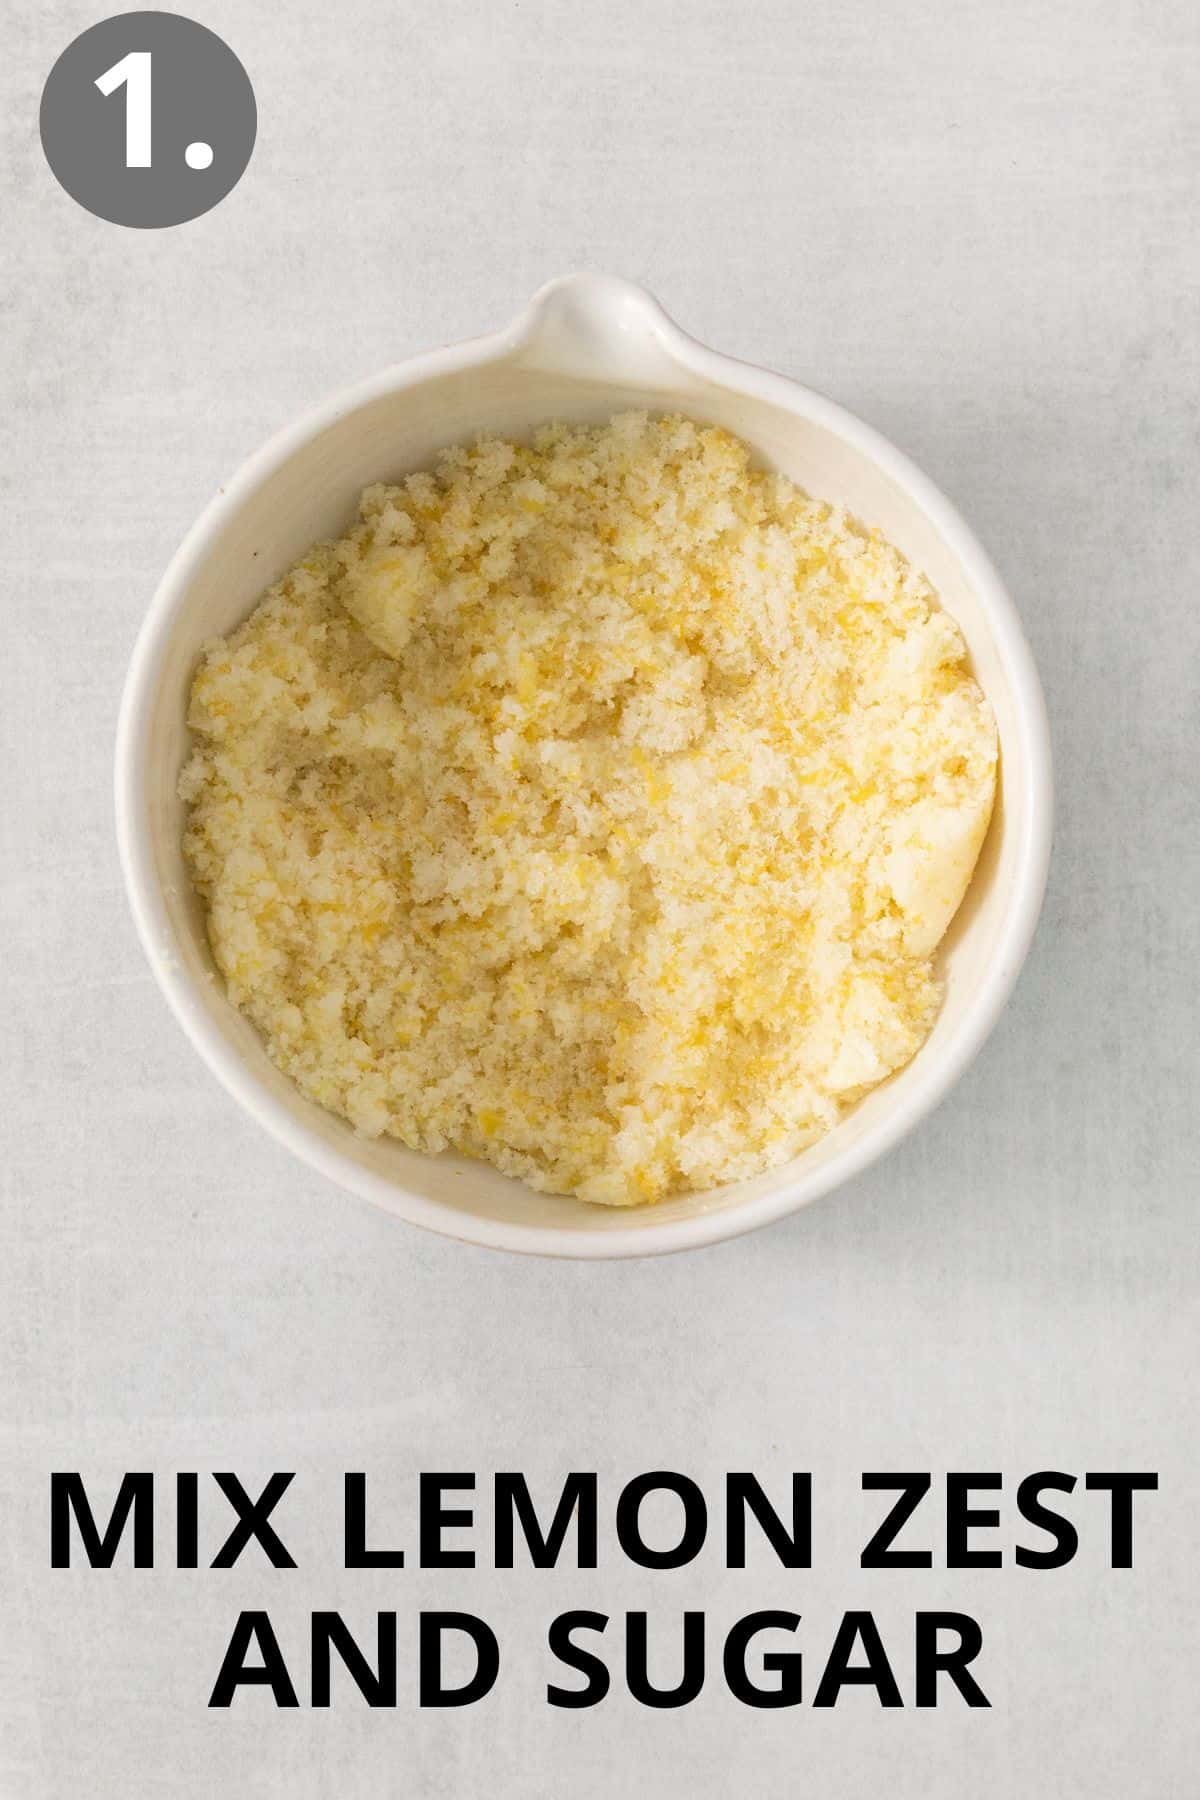 Lemon zest and sugar in a bowl